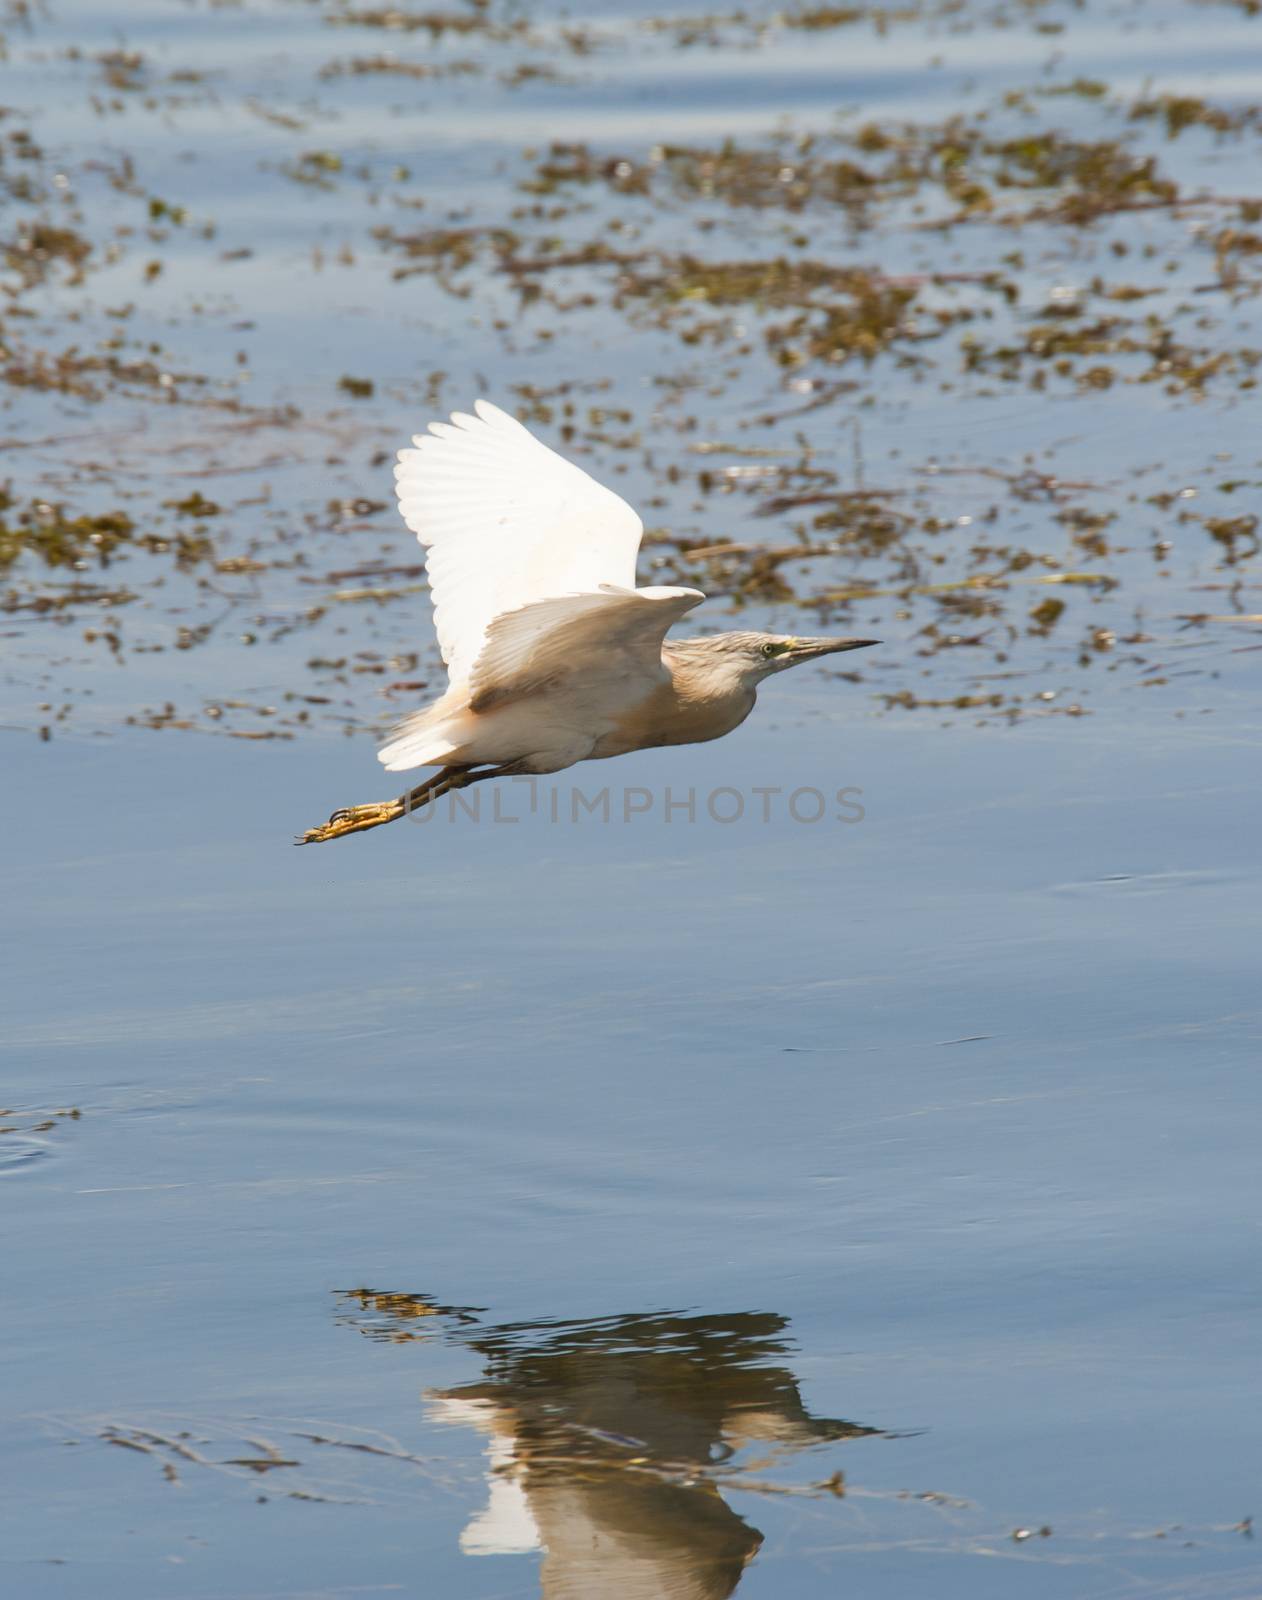 Squacco heron wild bird flying over reeds in the shallow water of a river